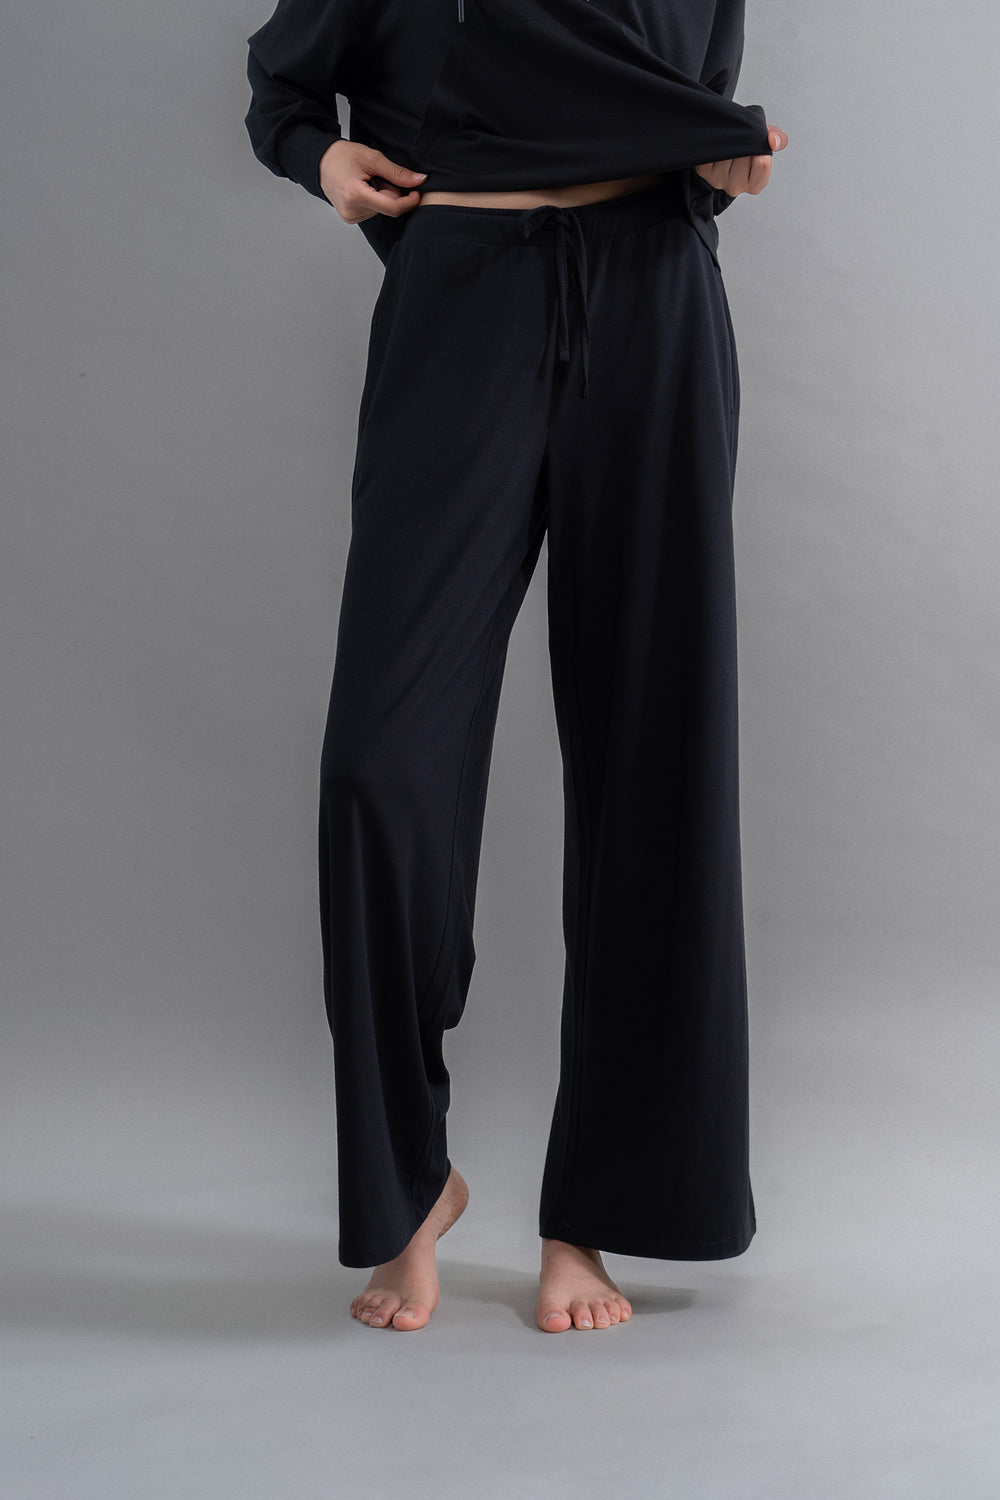 Limited Edition Luxflo® Travel Black Flared Pajamas